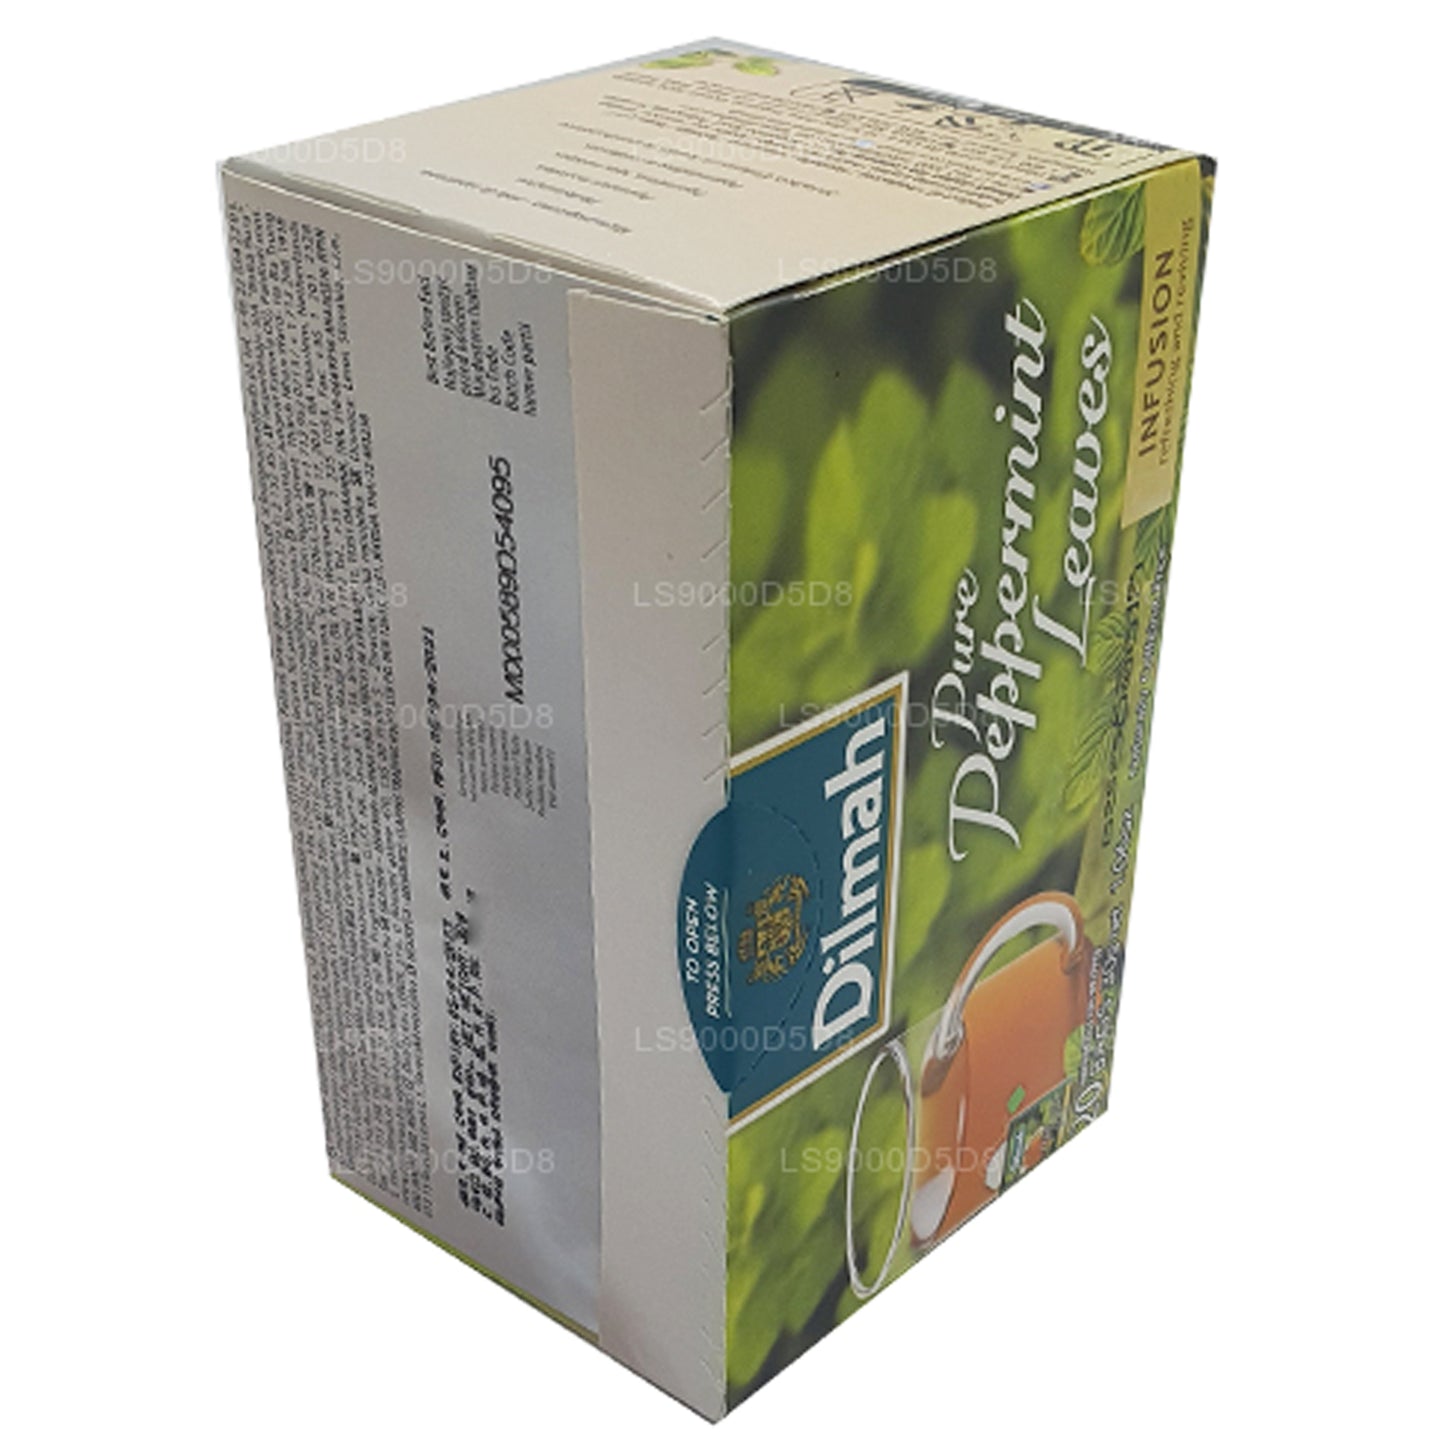 Dilmah Pure Peppermint Leaves (30g) 20 Tea Bags